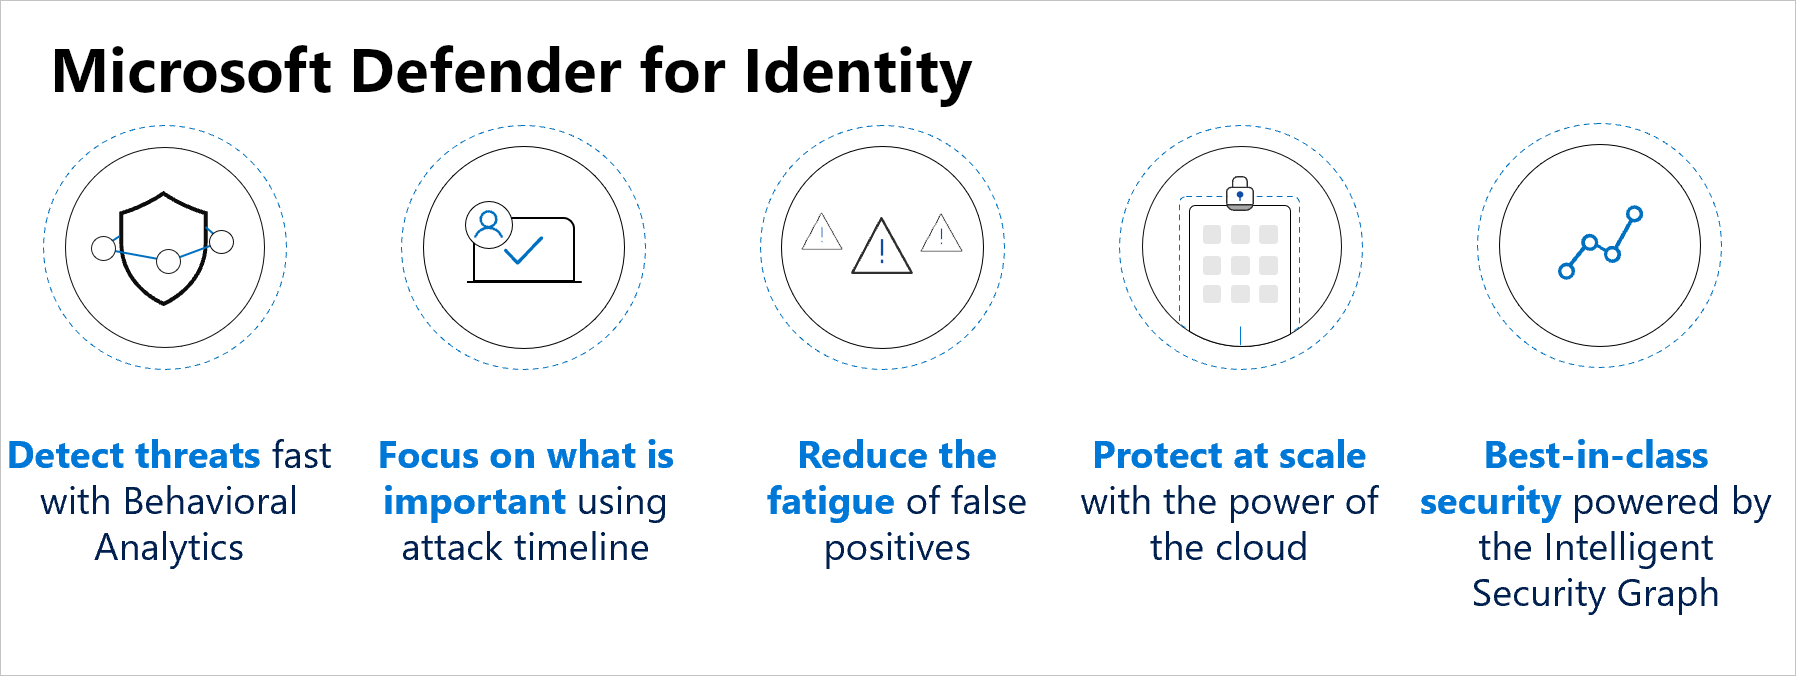 The benefits of Microsoft Defender for Identity.